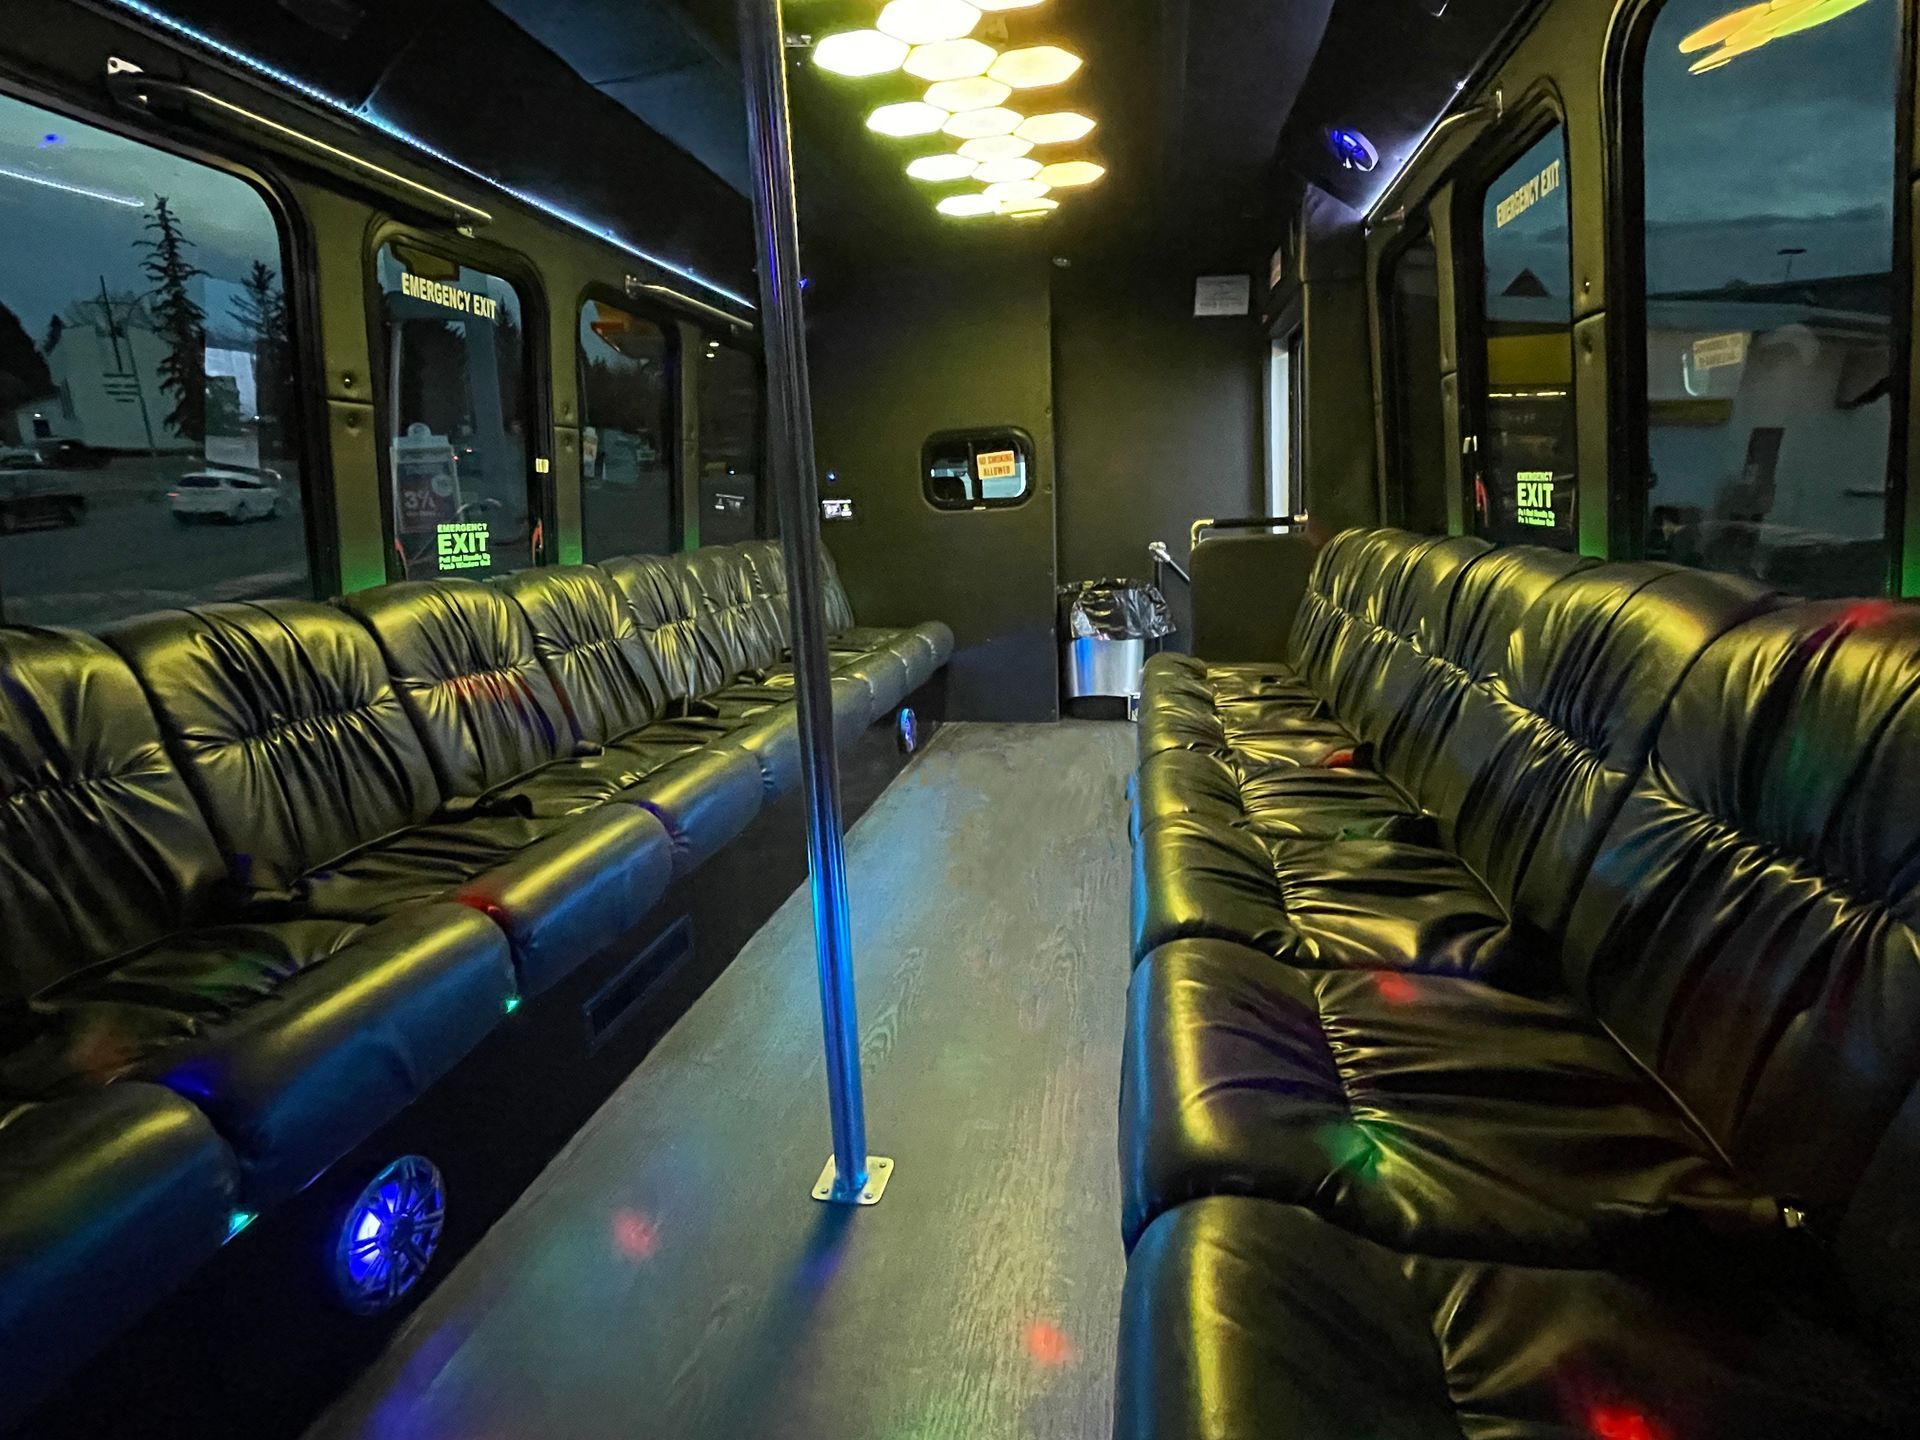 Ford Transit Battisti Limo To Go 12 Passenger black party bus interior rear facing view with wraparound seating and LED lighting